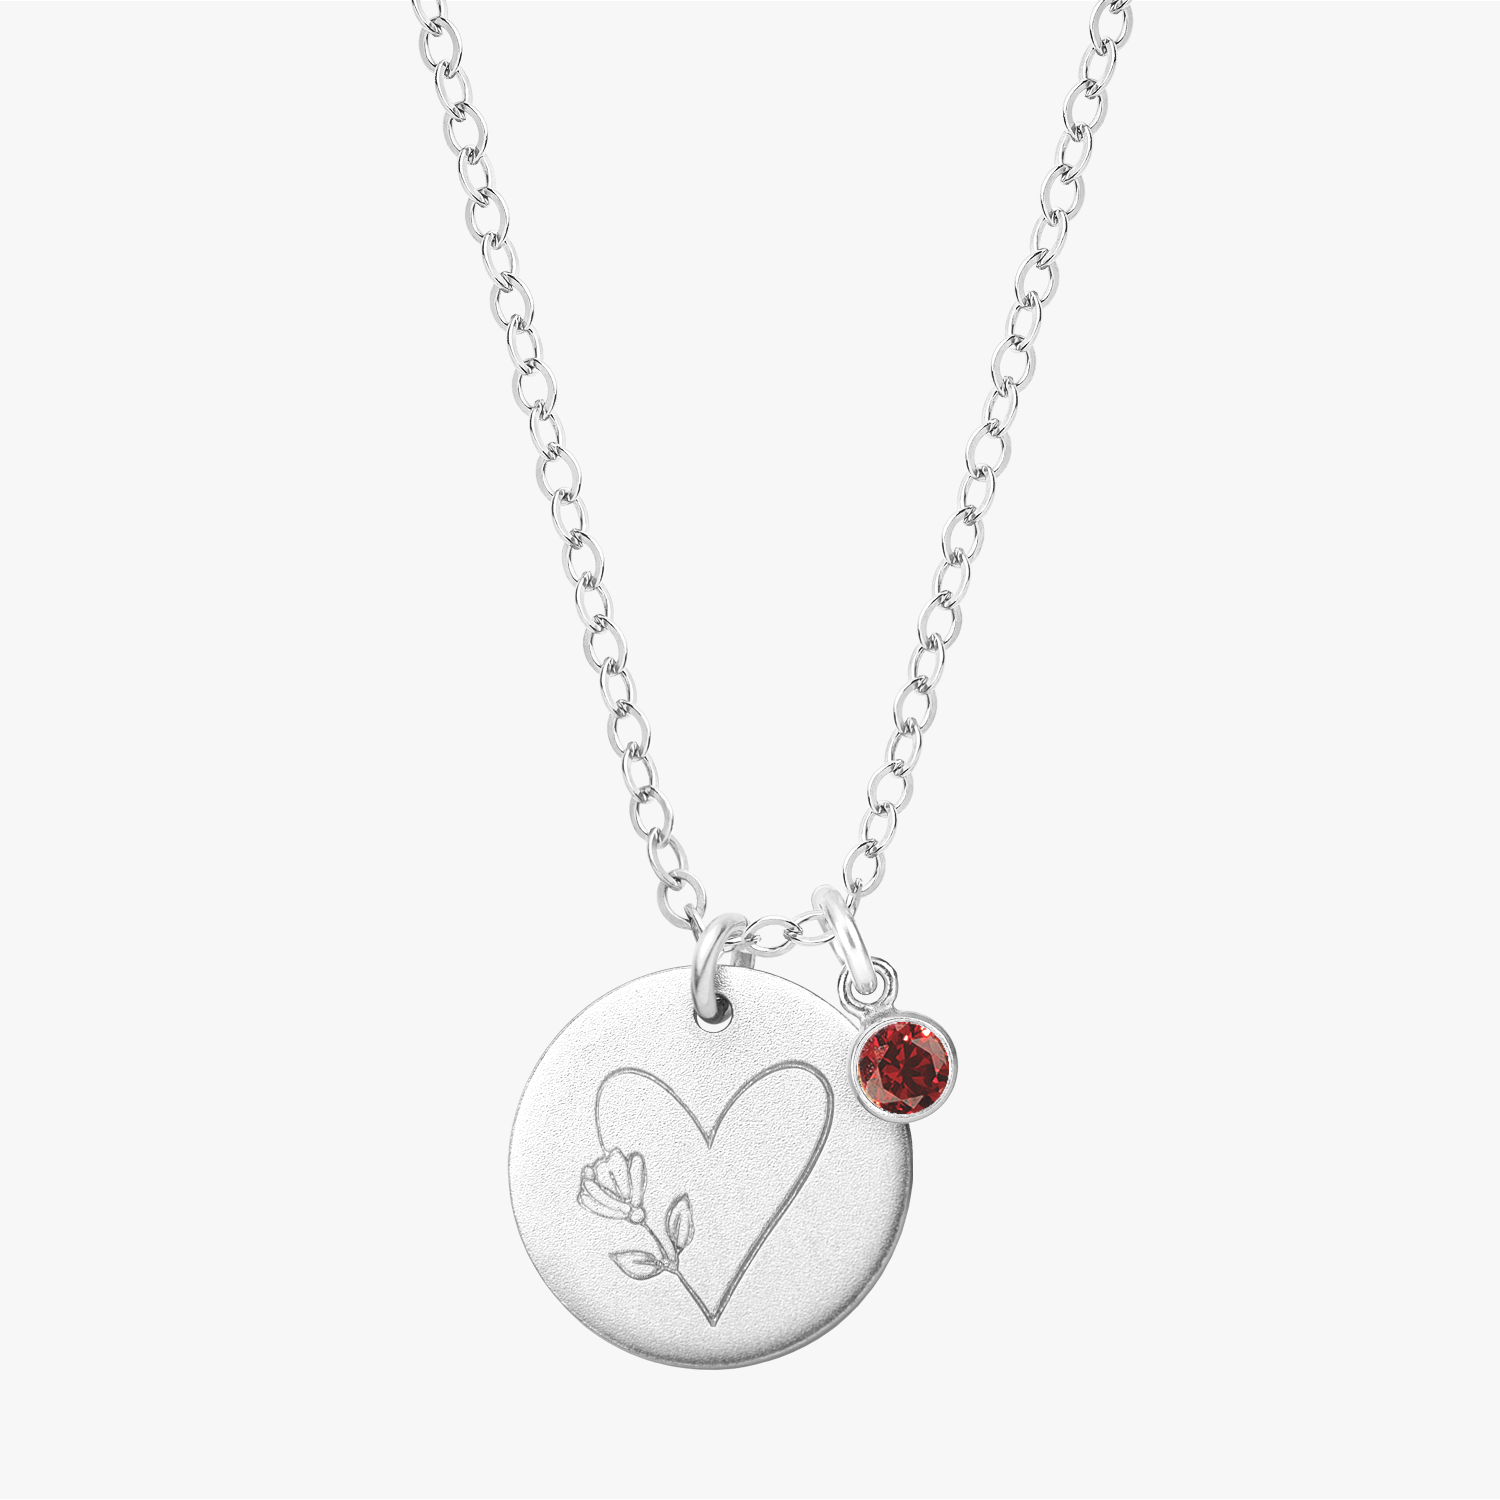 Personalized EmbraceYou Silver Necklace